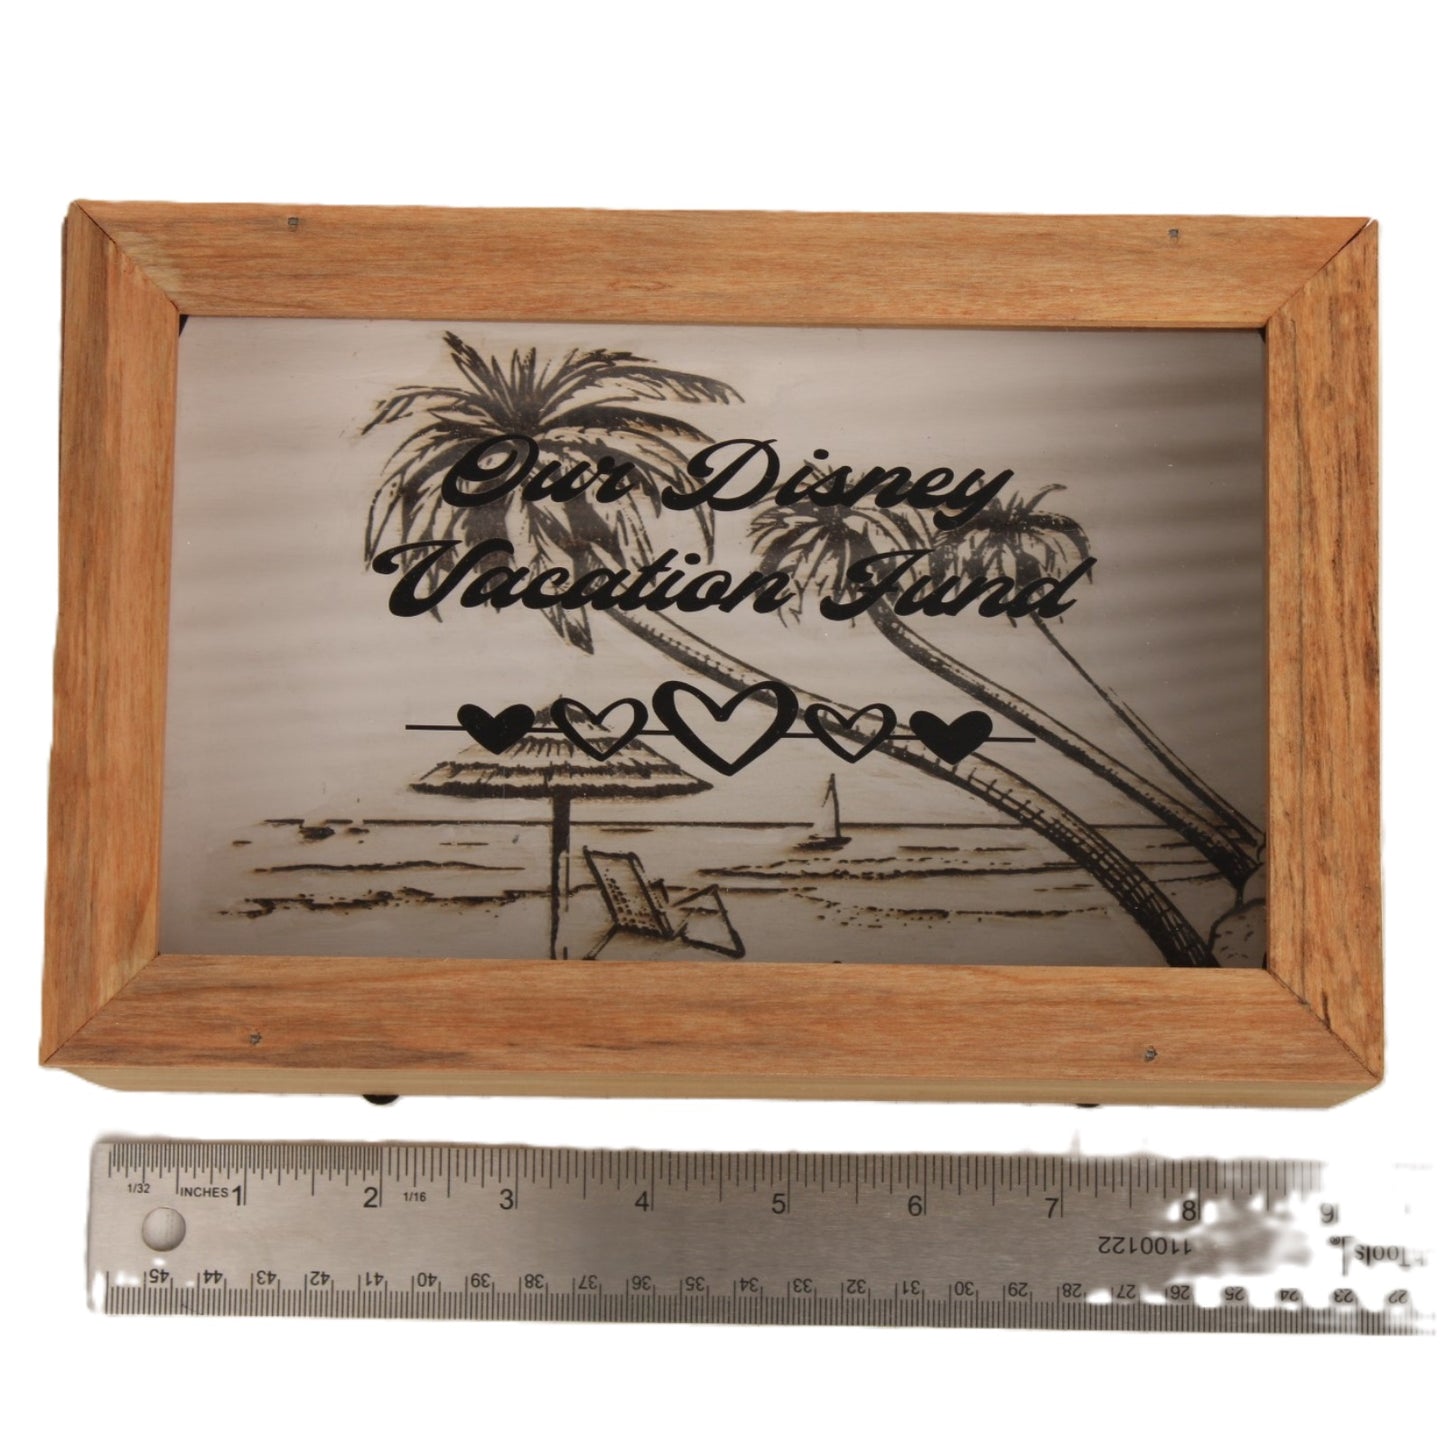 Savings Bank with Disney Vacation Fund and hearts on front and a beach scene engraved in background